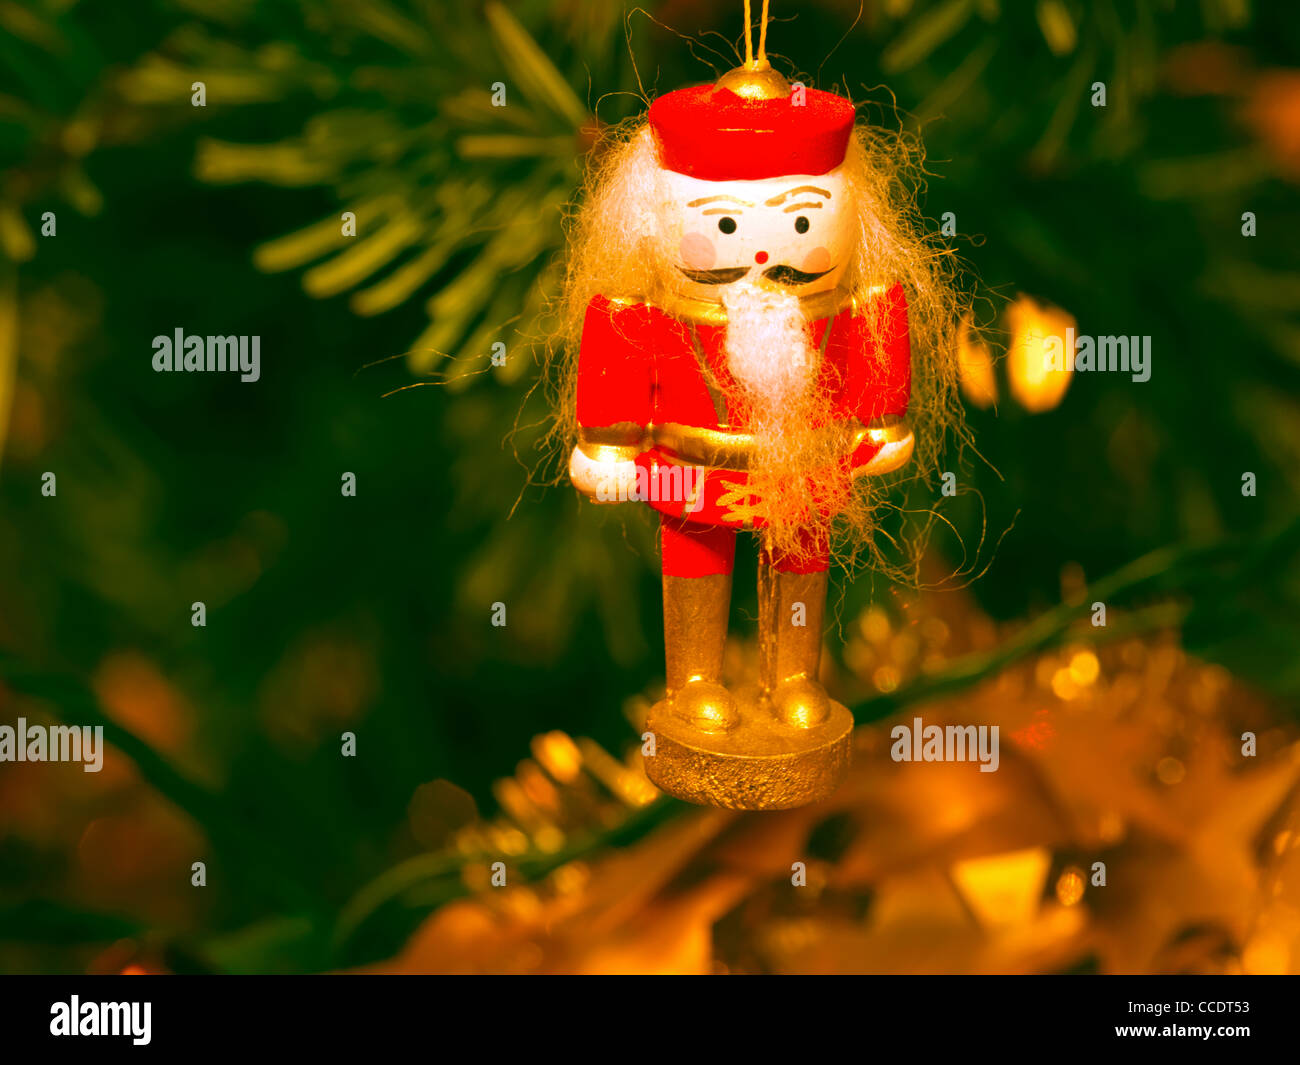 Toy Soldier Christmas Decoration Hanging on Christmas Tree Banque D'Images